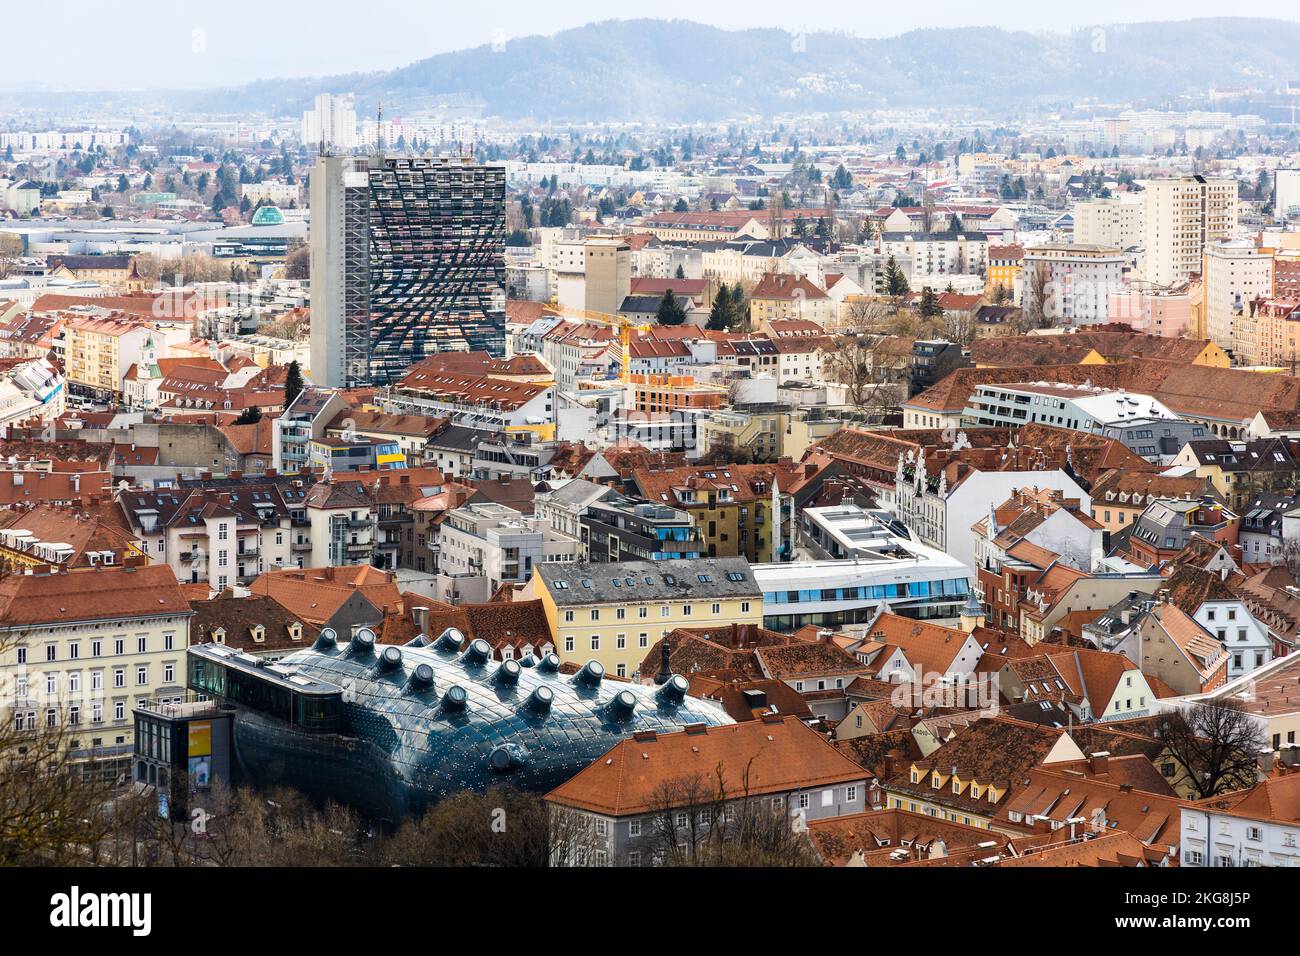 View of Graz with Kunsthaus, riverside contemporary art museum, and A1 Tower at the background. Graz, Styria, Austria. Stock Photo